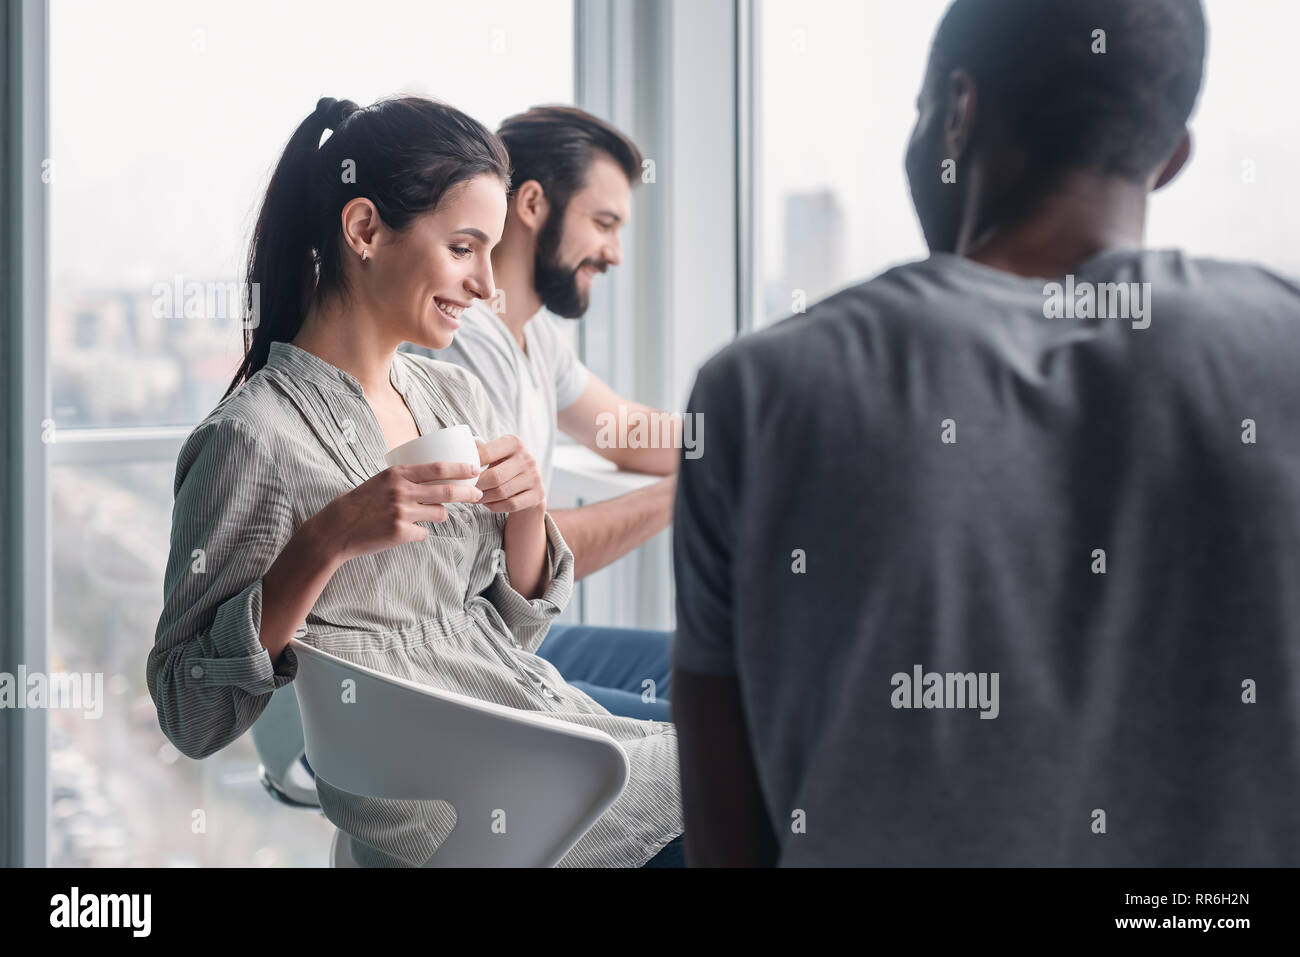 Happy joyful diverse business people laughing at funny joke talking at work break, cheerful corporate team office workers multi-ethnic young coworkers having fun, engaged in teambuilding activity Stock Photo